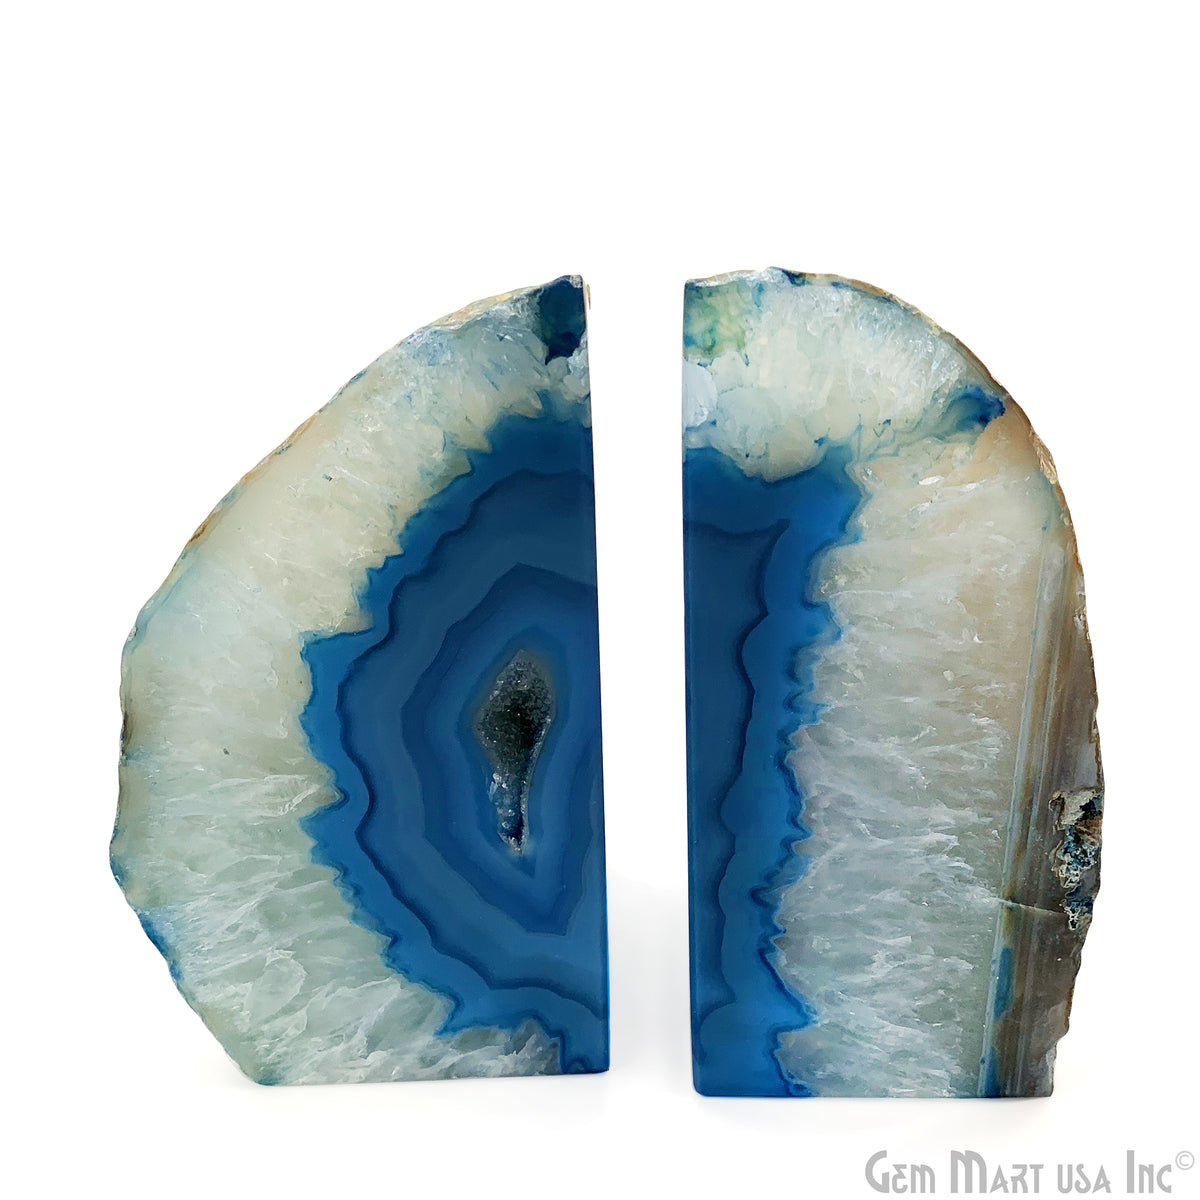 Large Geode Bookend. Blue Agate Bookend Pair. (3.4lbs, 3-4inch). Mineral Rock Formation, Healing Energy Crystal, Home Decor. *Ships Free